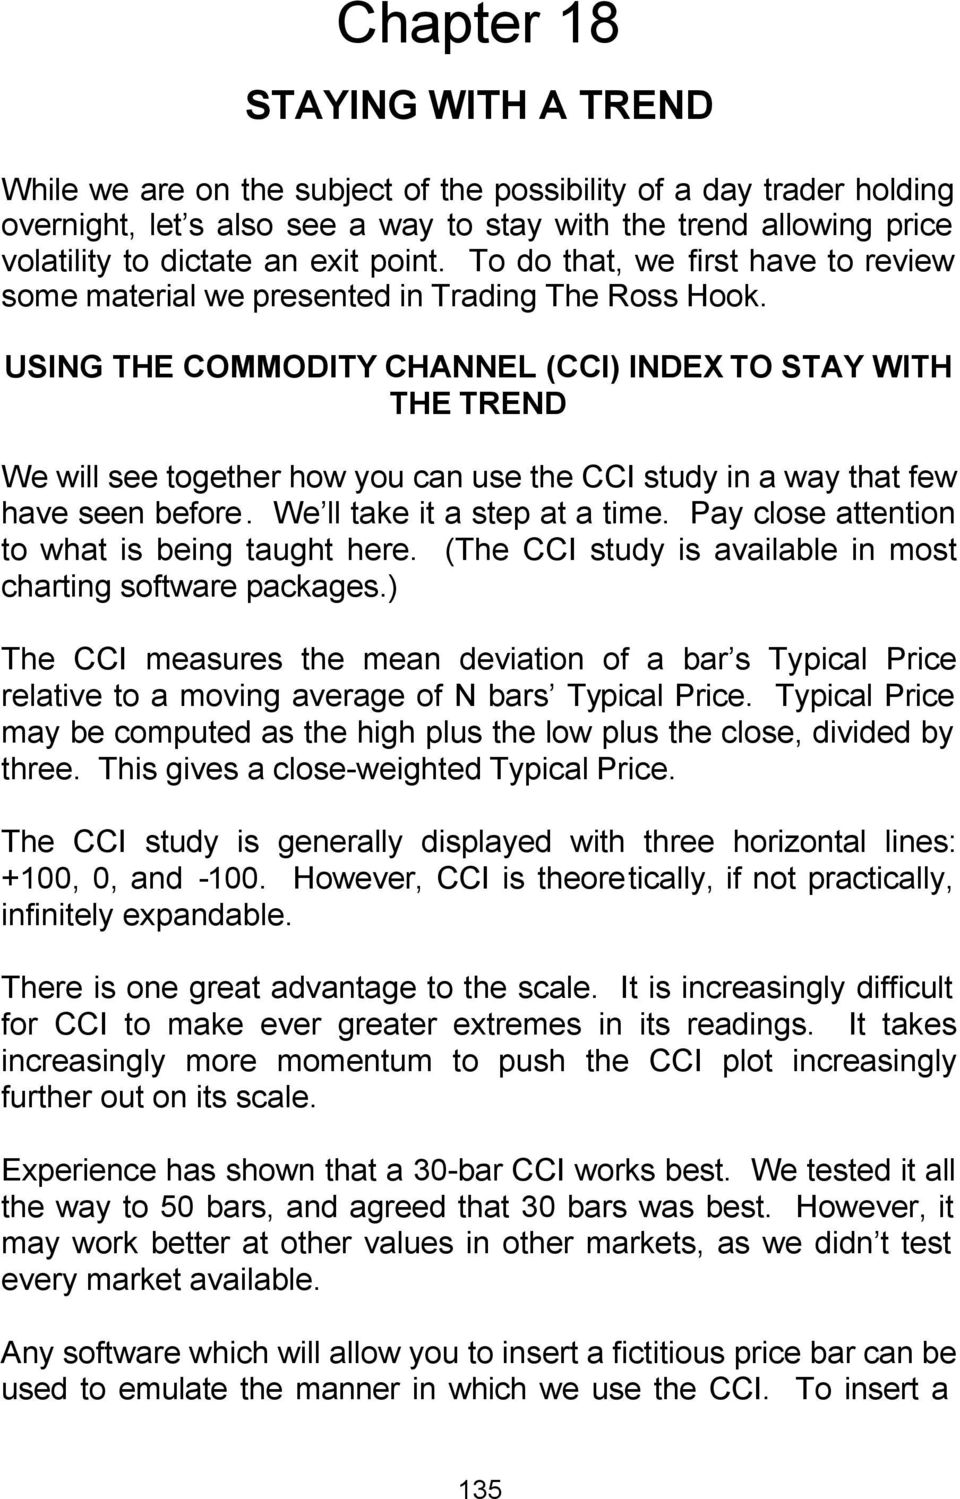 USING THE COMMODITY CHANNEL (CCI) INDEX TO STAY WITH THE TREND We will see together how you can use the CCI study in a way that few have seen before. We ll take it a step at a time.